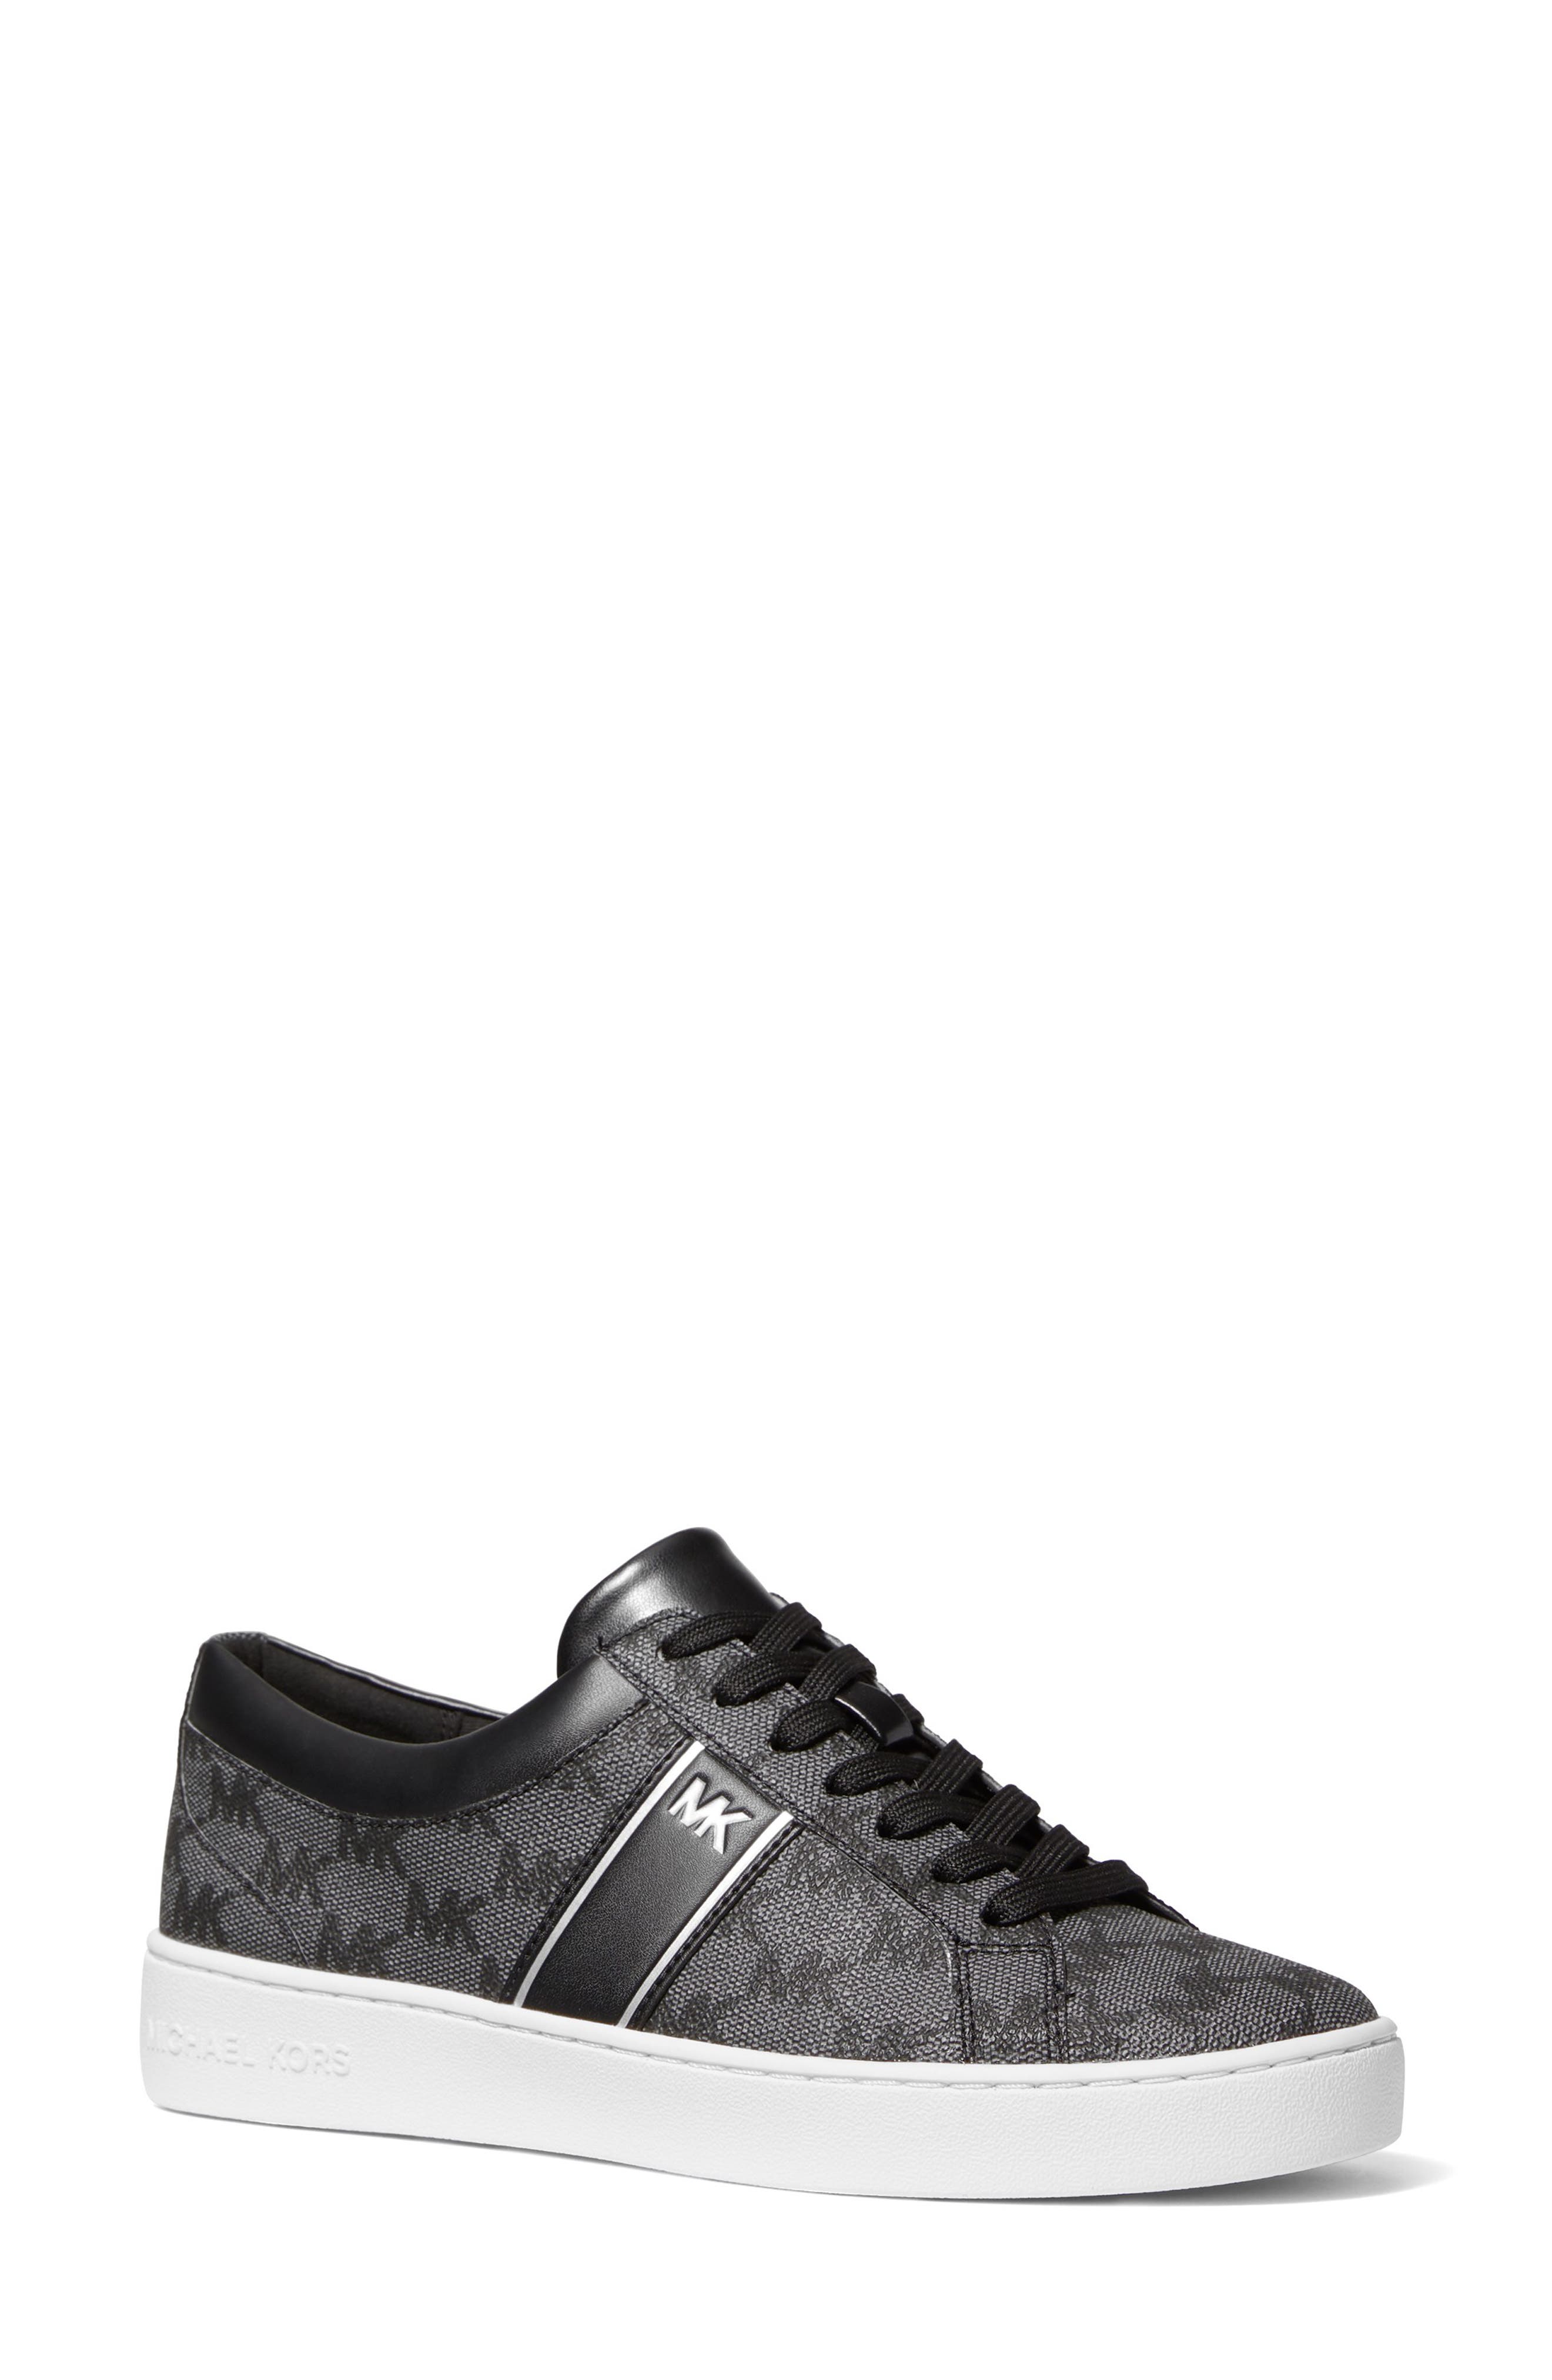 UPC 196108548428 product image for MICHAEL Michael Kors Lace-up Fashion Sneaker in Black at Nordstrom, Size 6 | upcitemdb.com